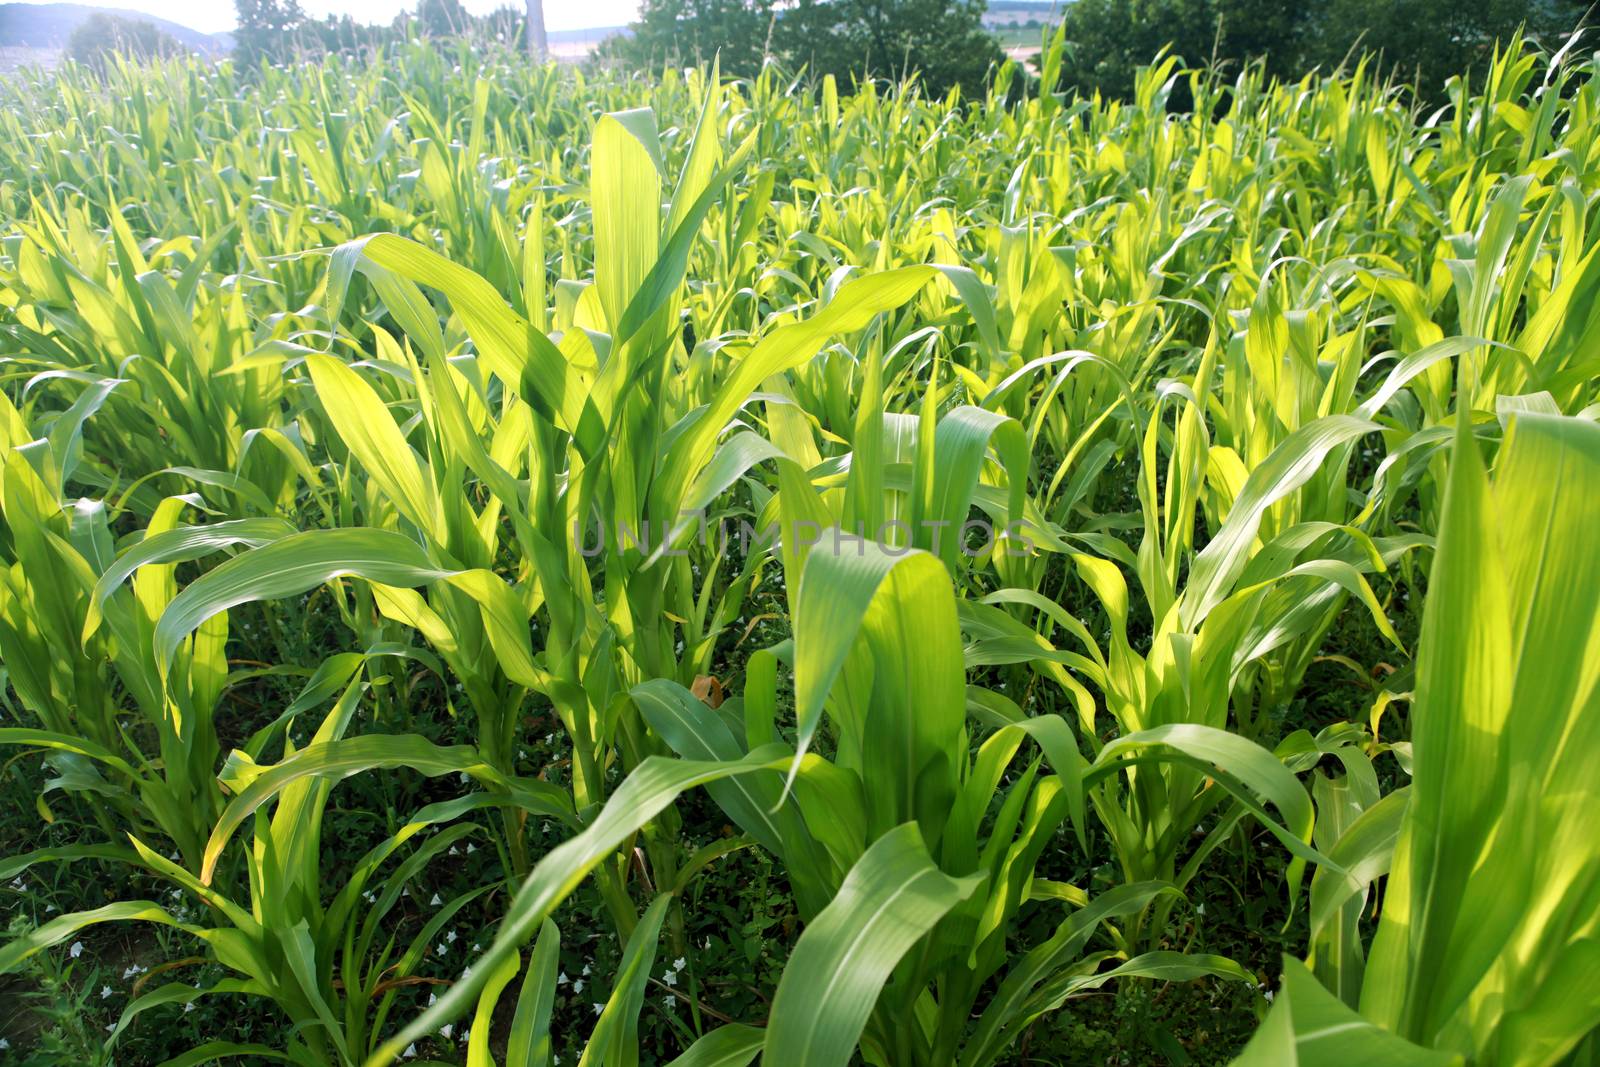 A green field of corn growing up